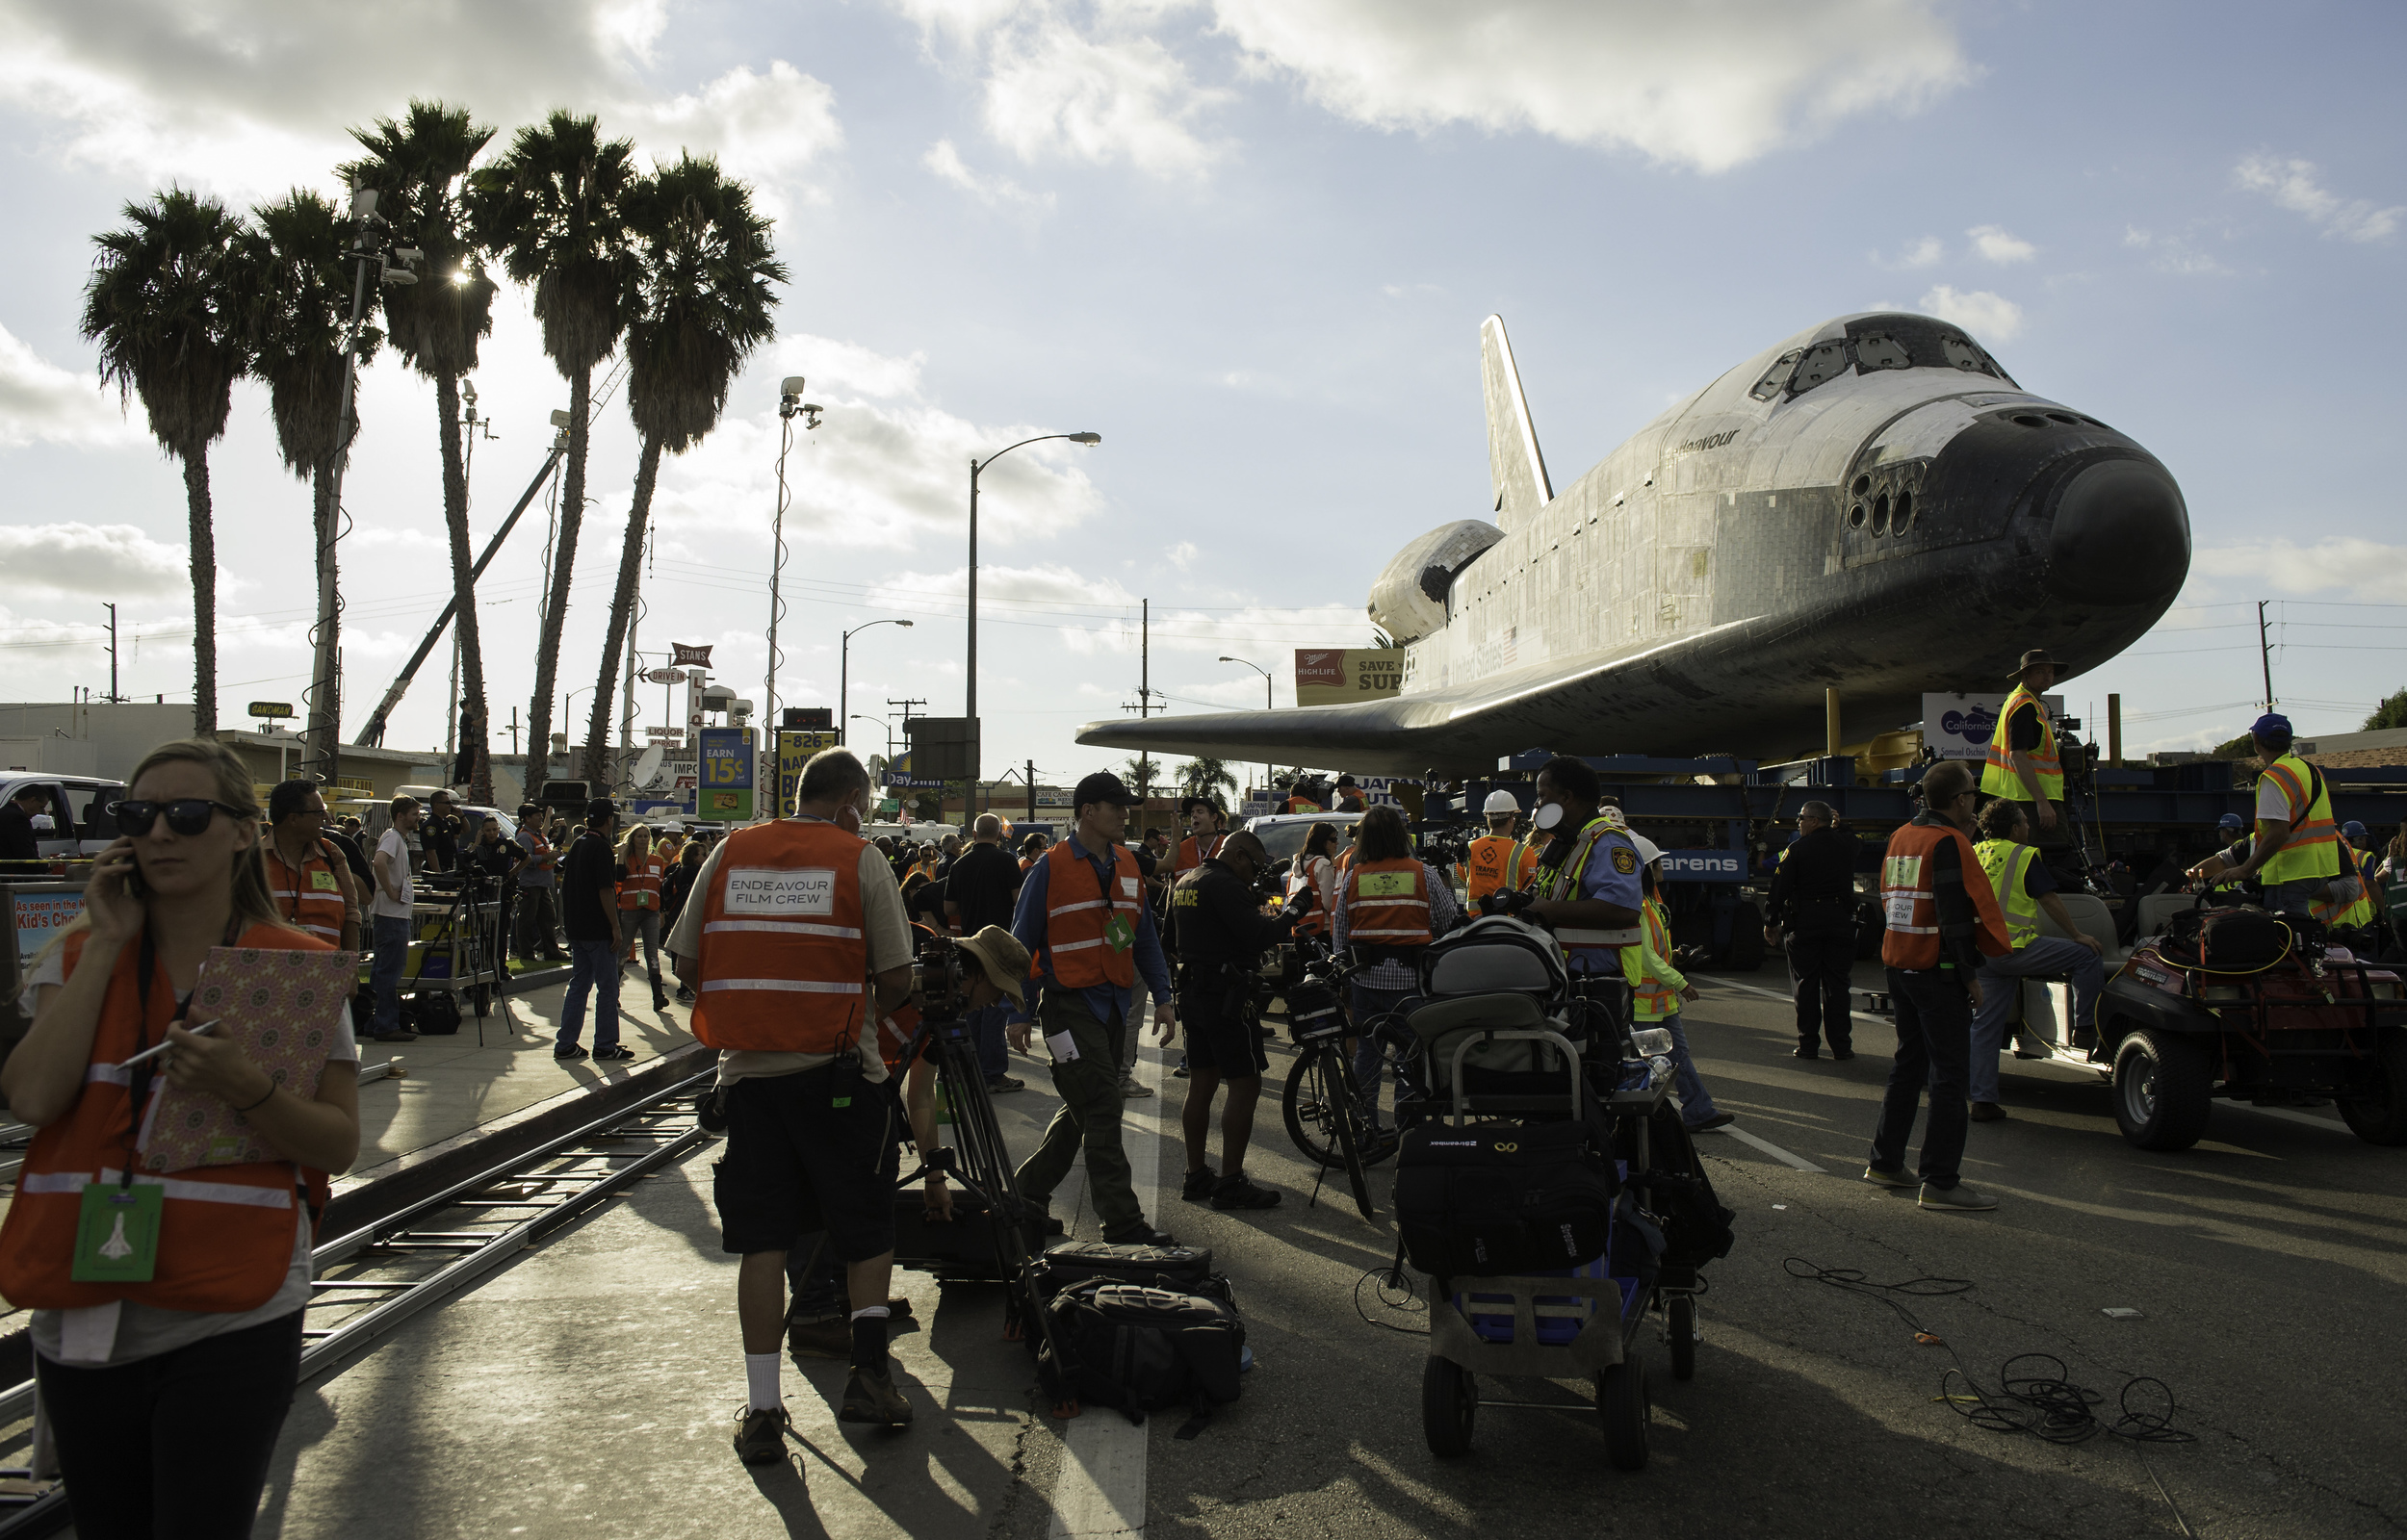  Support personnel and film crews are seen working around the space shuttle Endeavour as it traverses through Inglewood, Calif. on Friday, Oct. 12, 2012. Endeavour, built as a replacement for space shuttle Challenger, completed 25 missions, spent 299